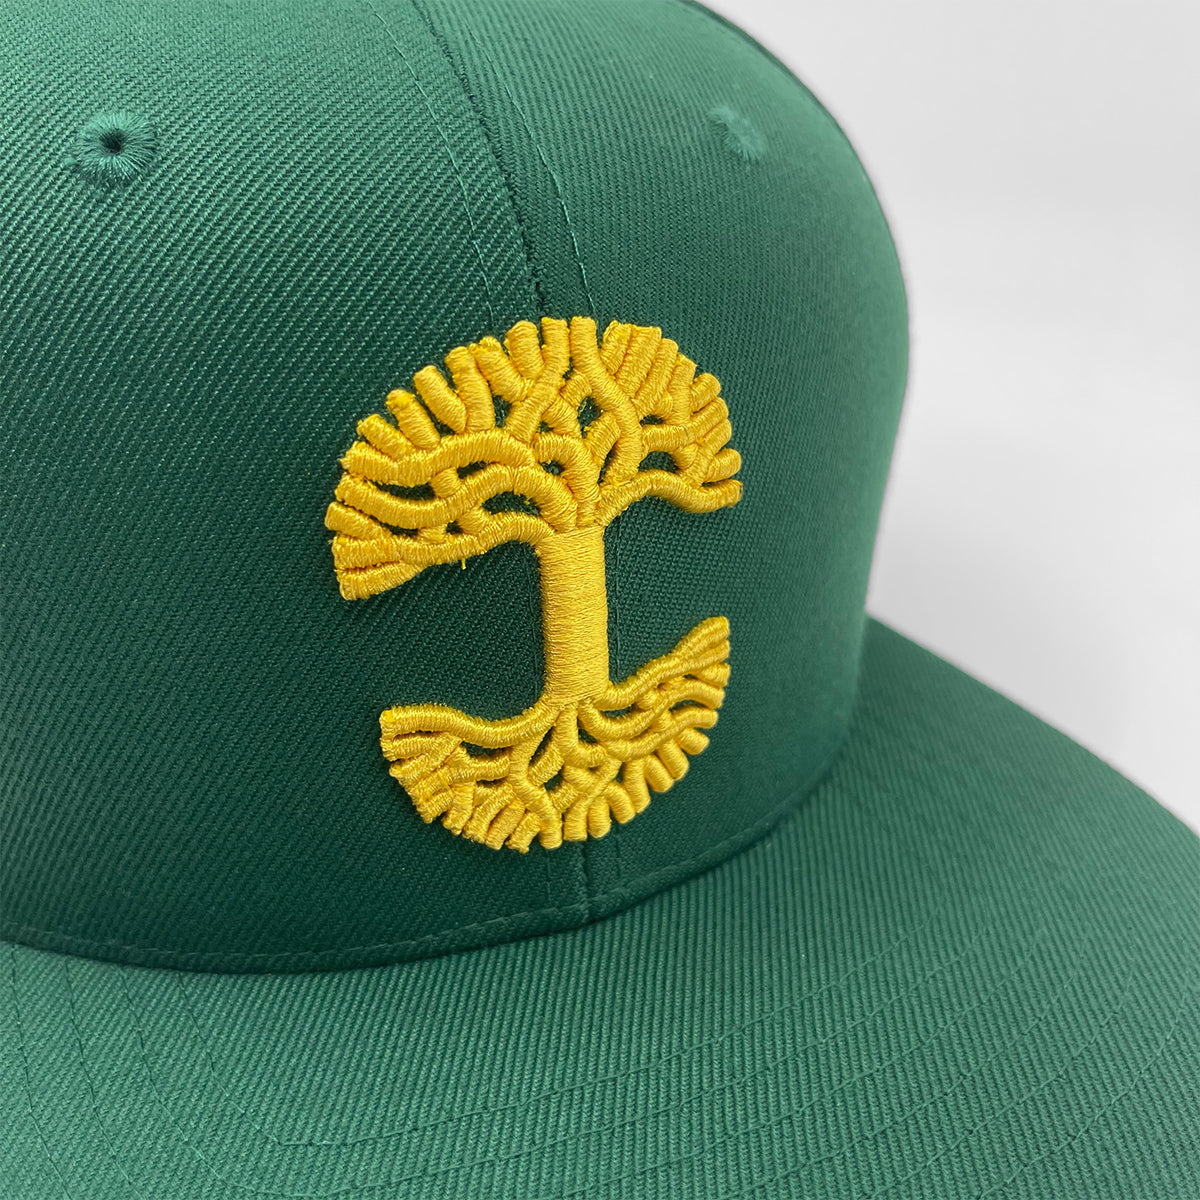 Close-up of gold embroidered Oaklandish tree logo on forest green cap.